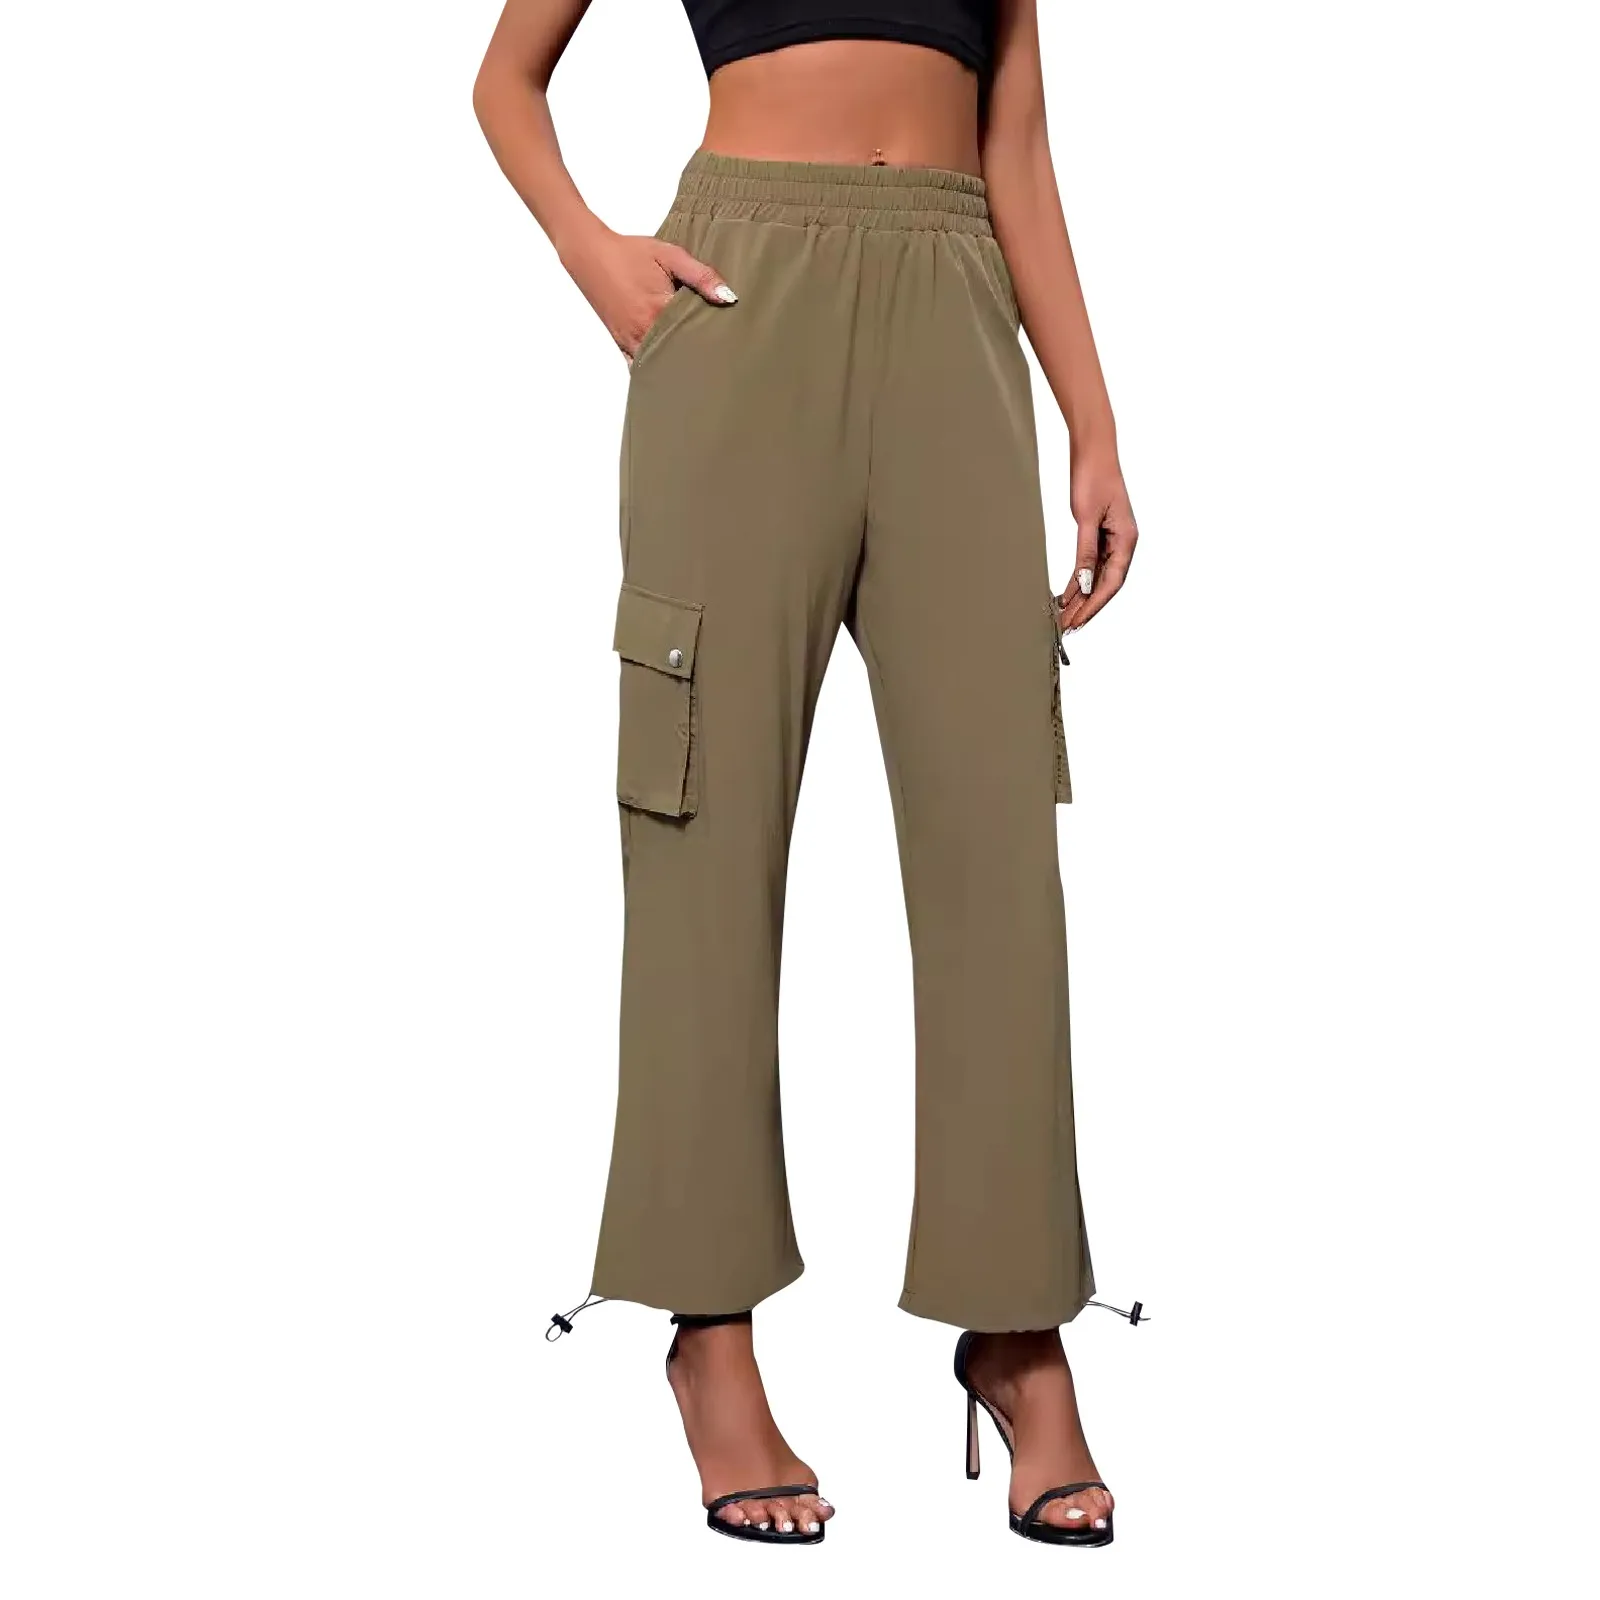 

Vintage Women's Cargo Pants Solid Color Streetwear High Waist Trousers Female Spring Overalls Baggy Wide Leg Pants